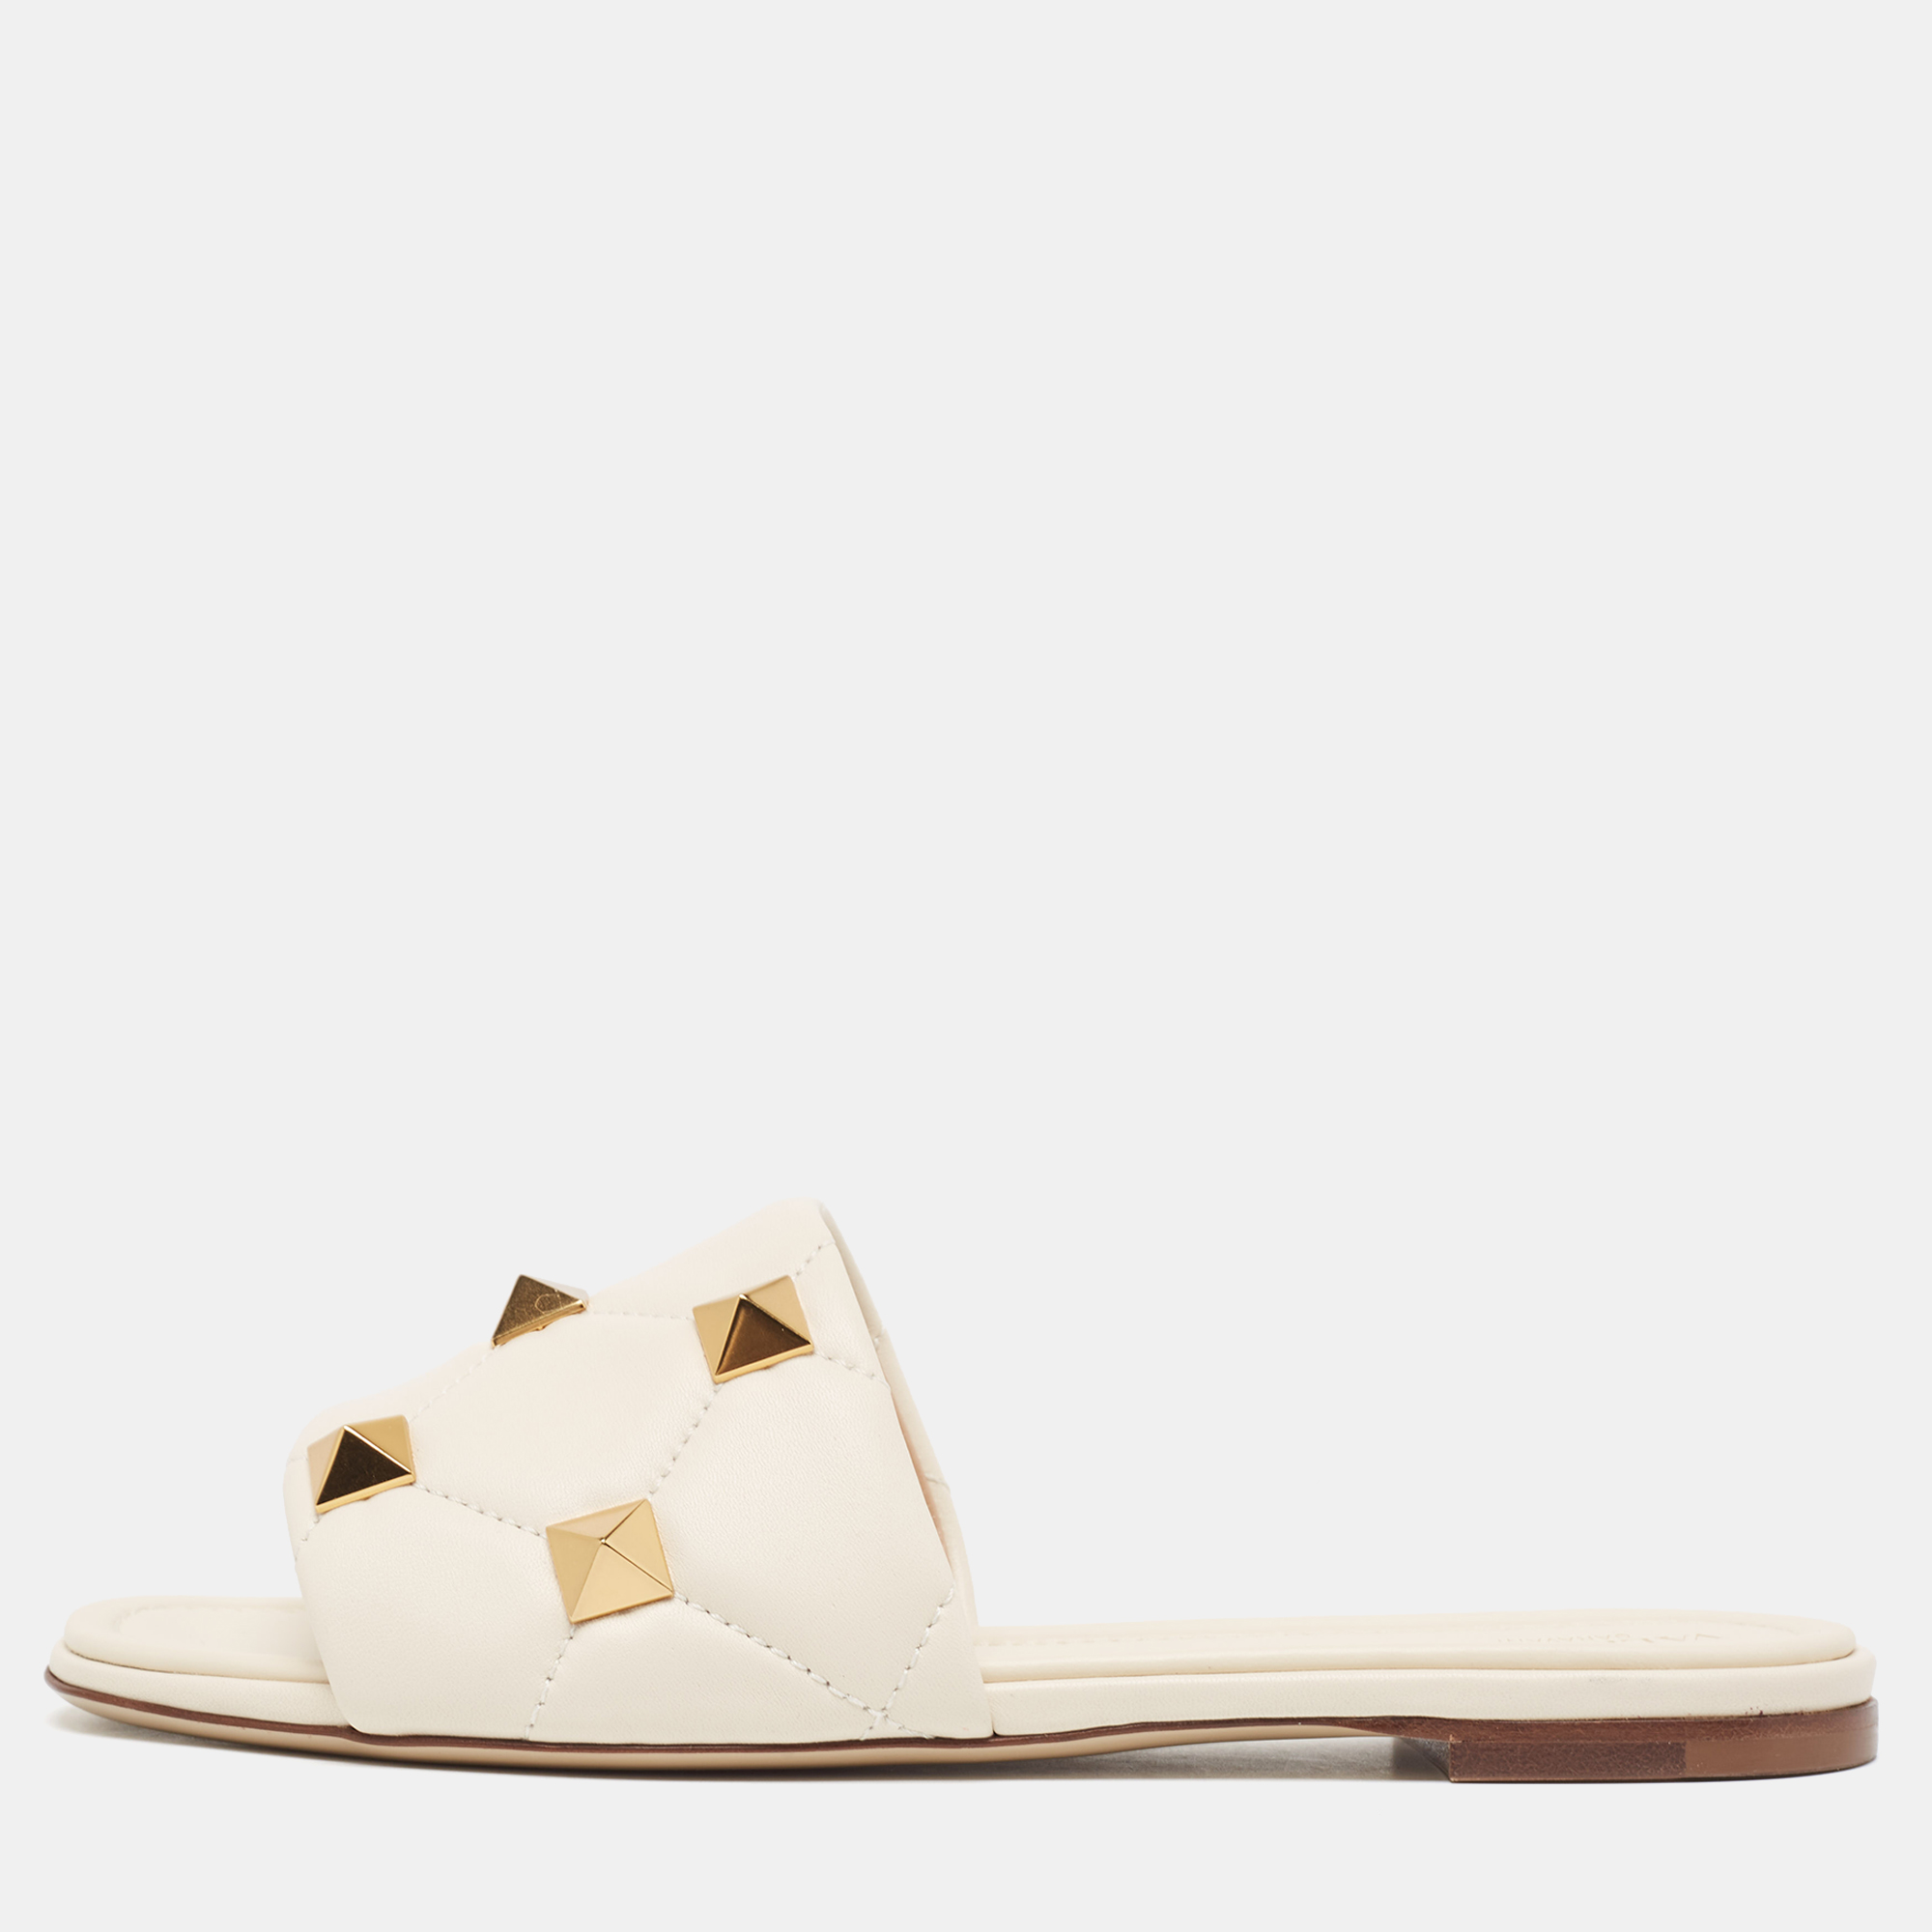 Valentino cream quilted leather roman stud flat slides size 41